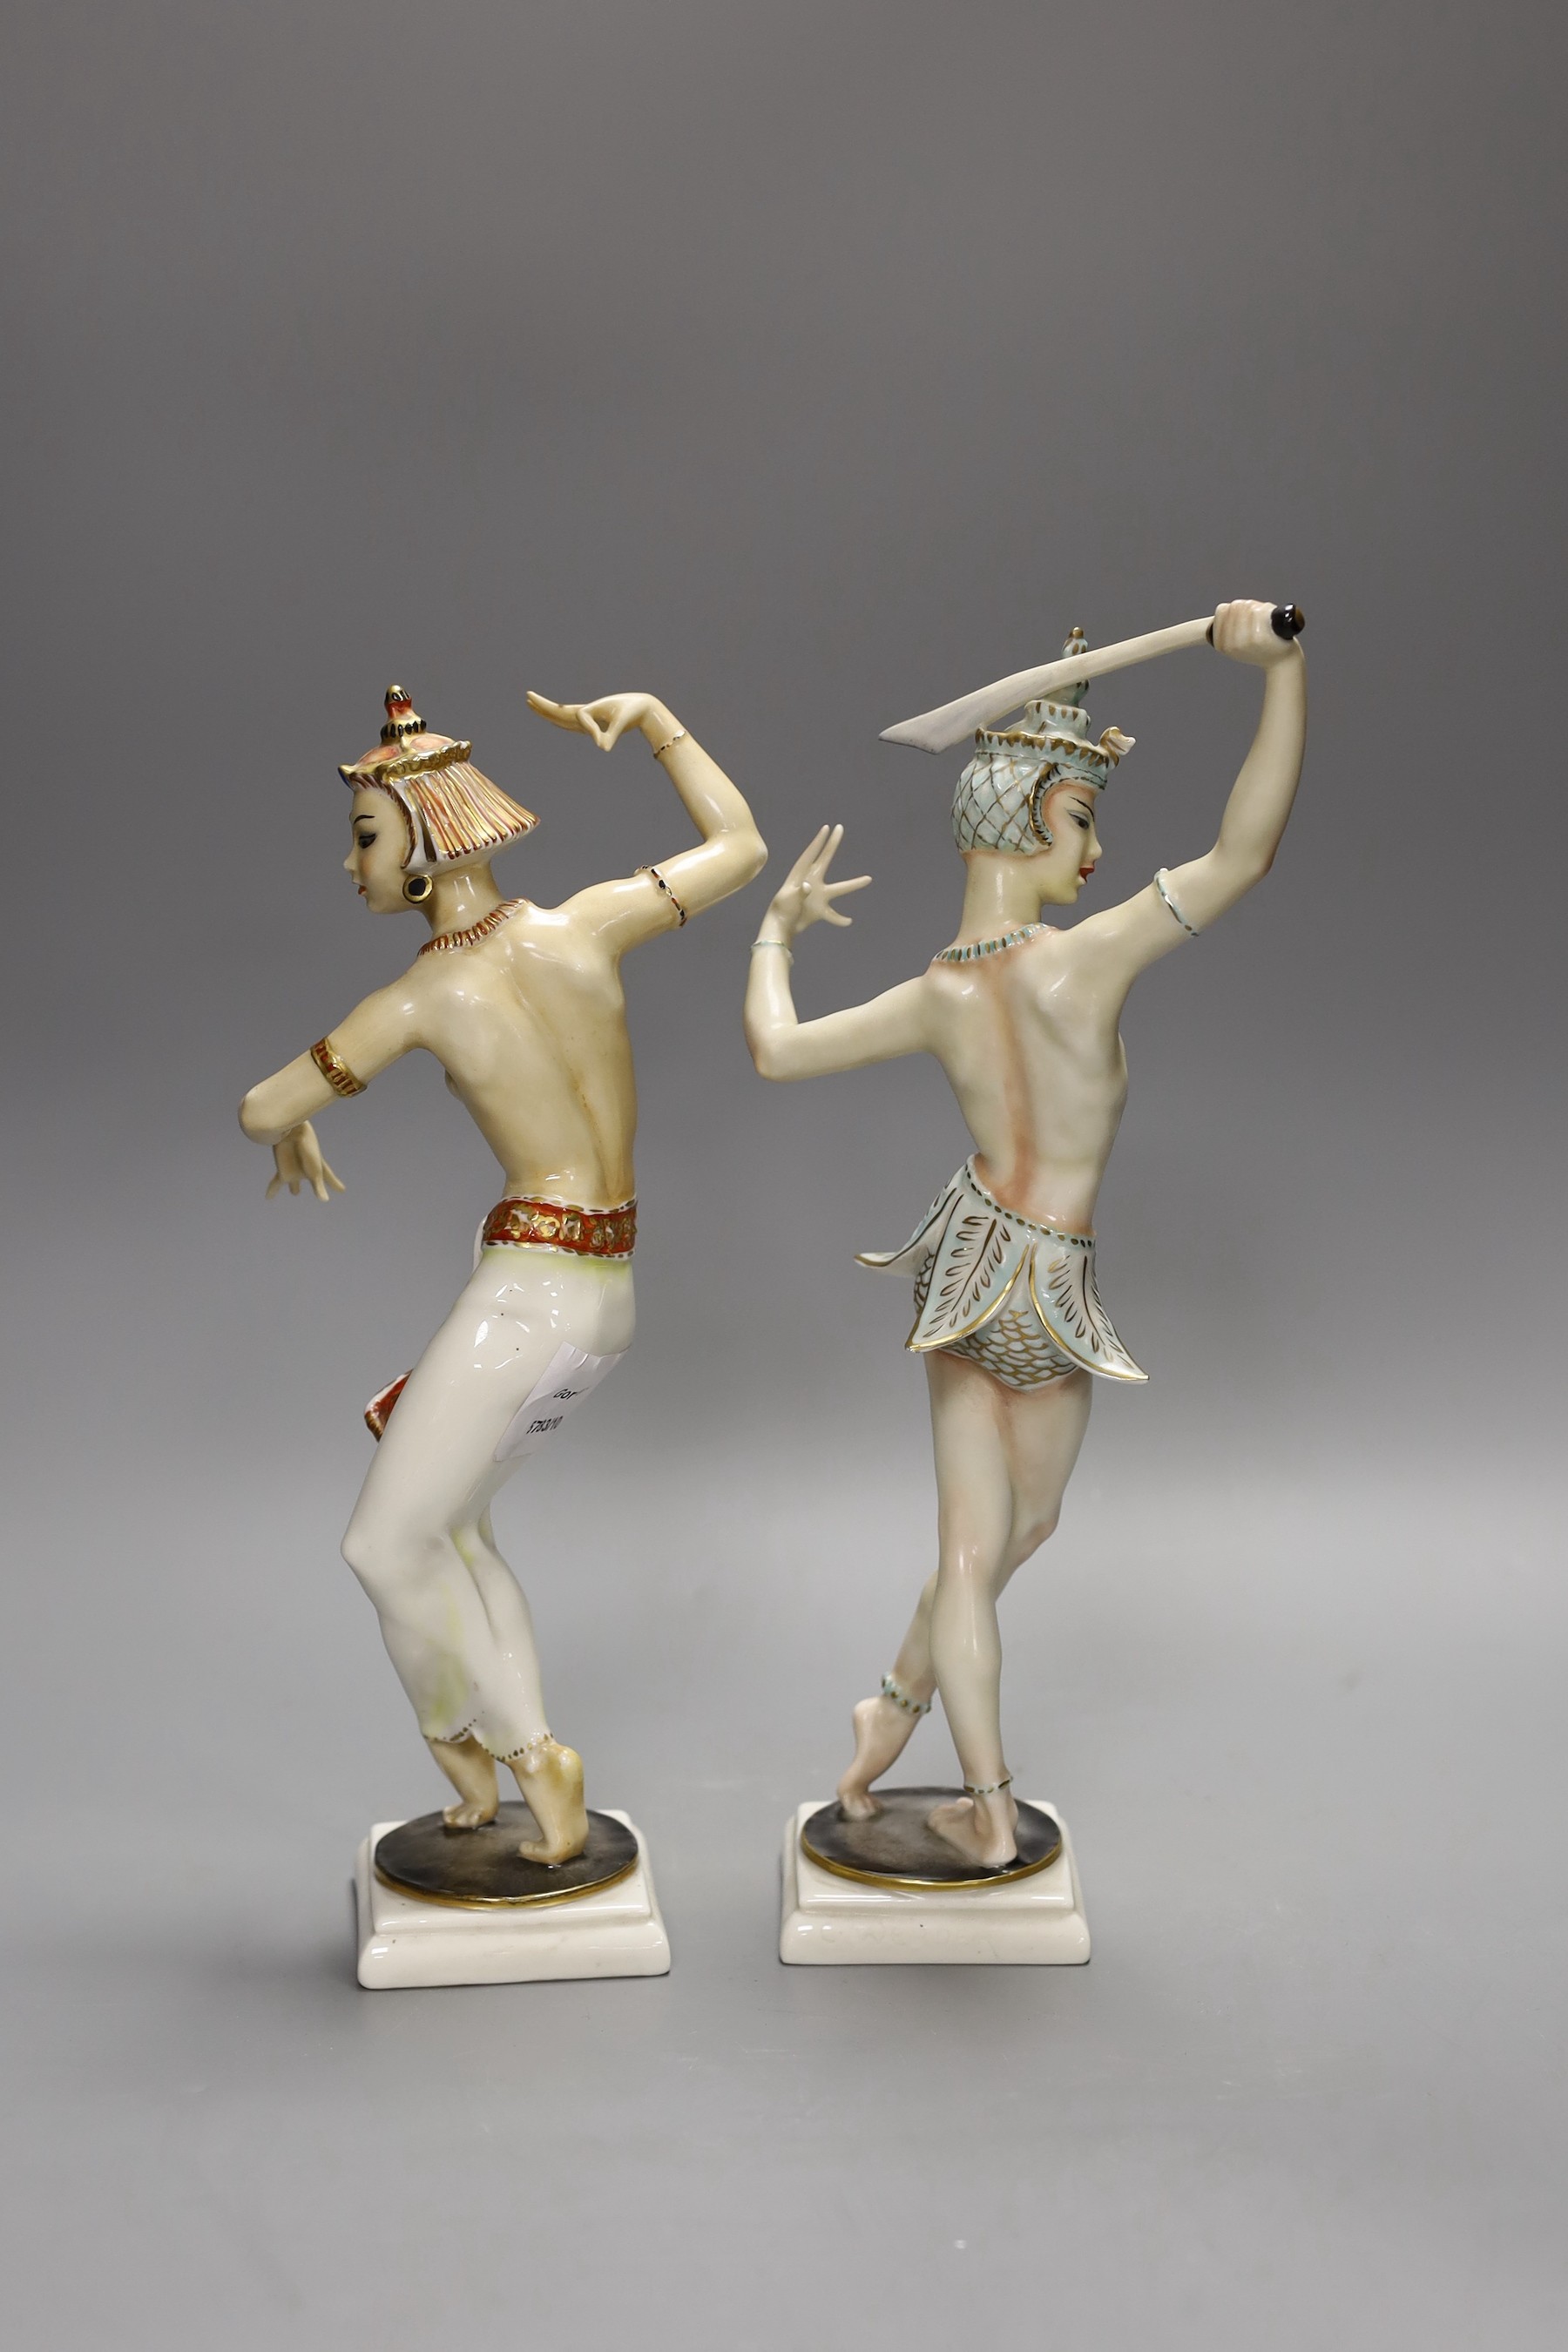 Two Hutschenreuter figures of Siamese dancers, 30cm - Image 2 of 3